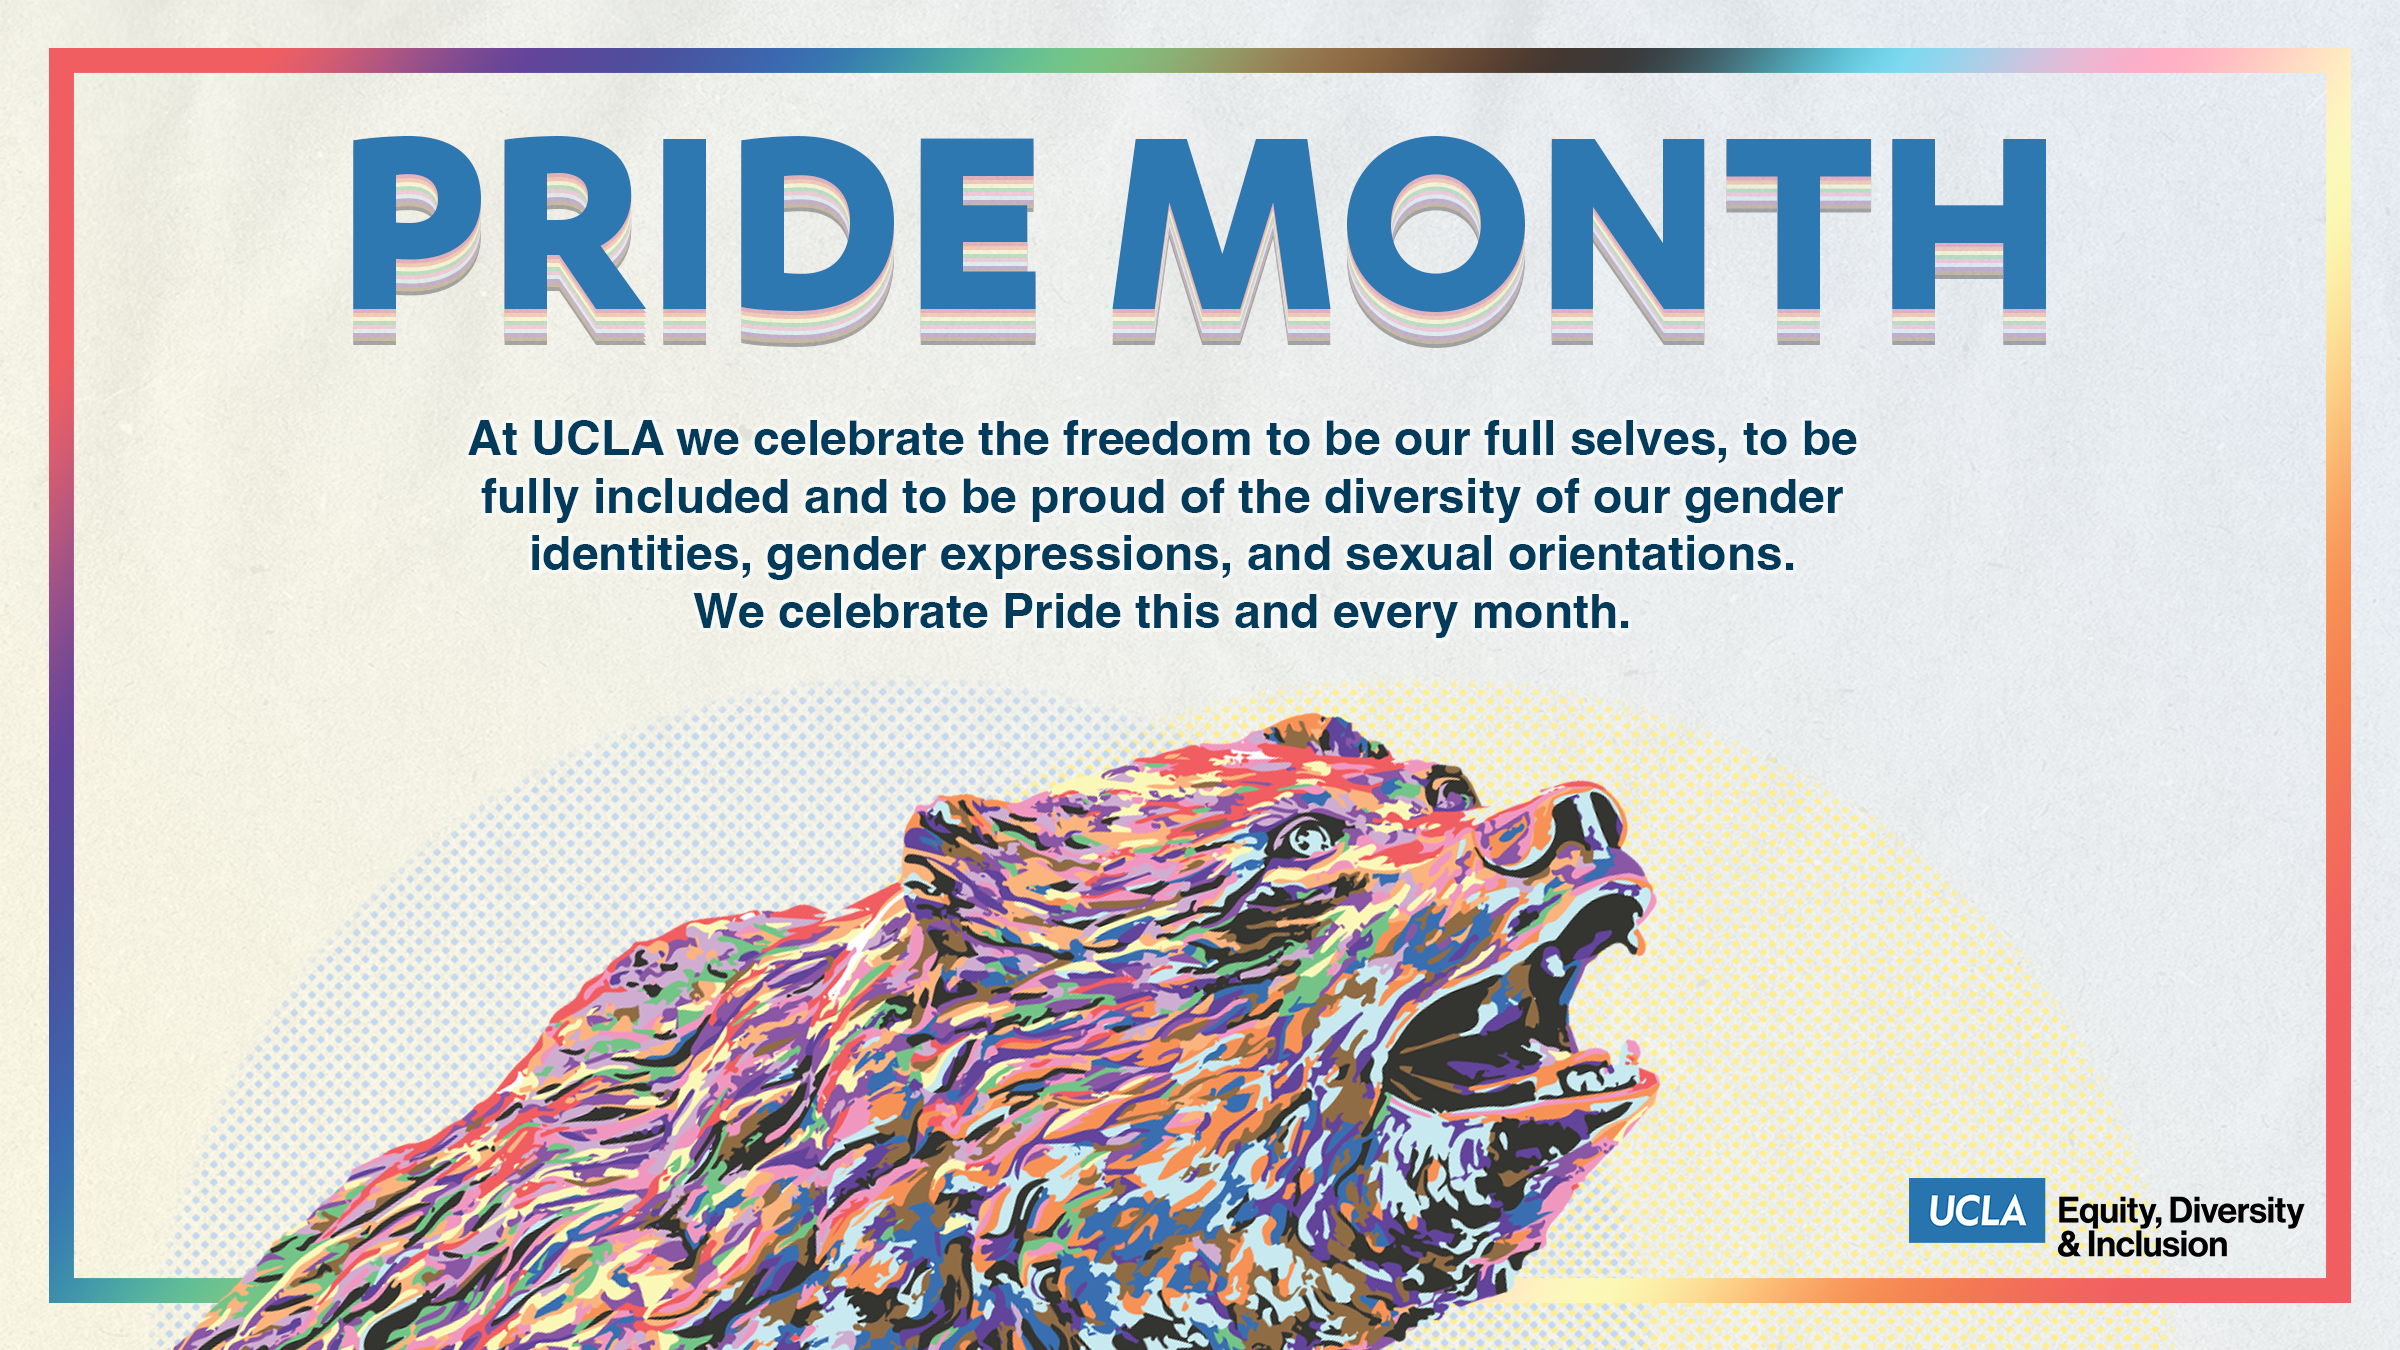 graphic celbrating pride month with rainbow-colored bruin bear - at ucla, we celebrate the freedom to be our full selves, to be fully included and to be proud of the diversity of our gender identities, gender expressions, and sexual orientations. we celebrate pride this and every month